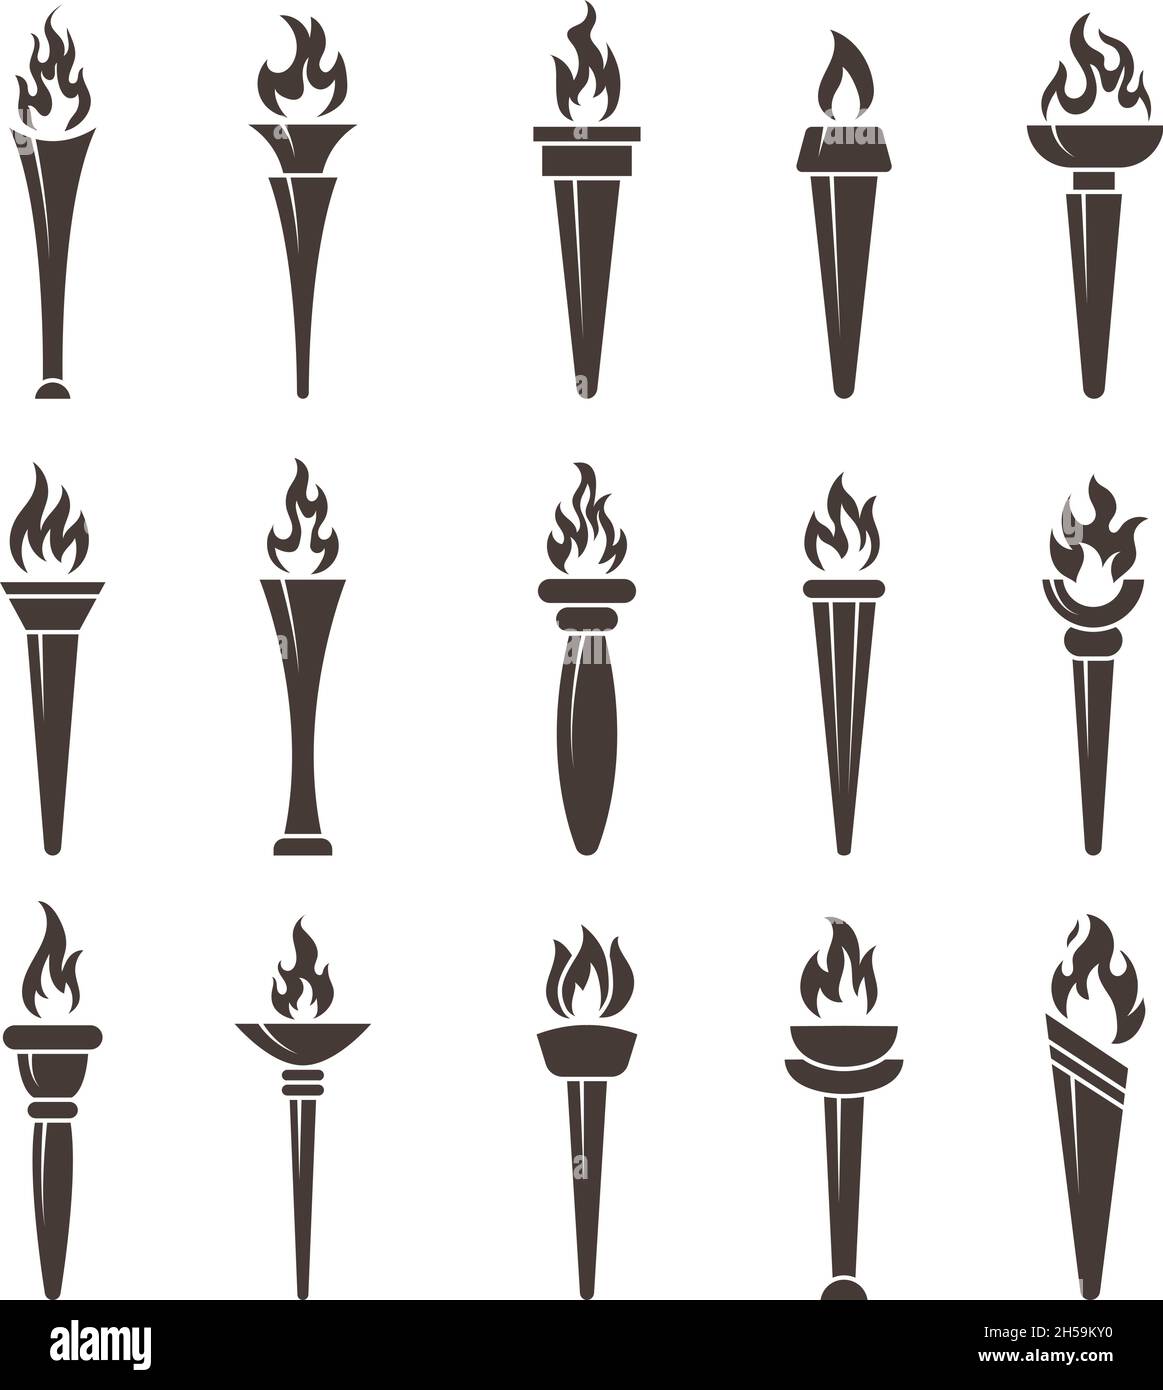 Torch flame. Sport symbols flaming graphic items recent vector flat badges collection Stock Vector